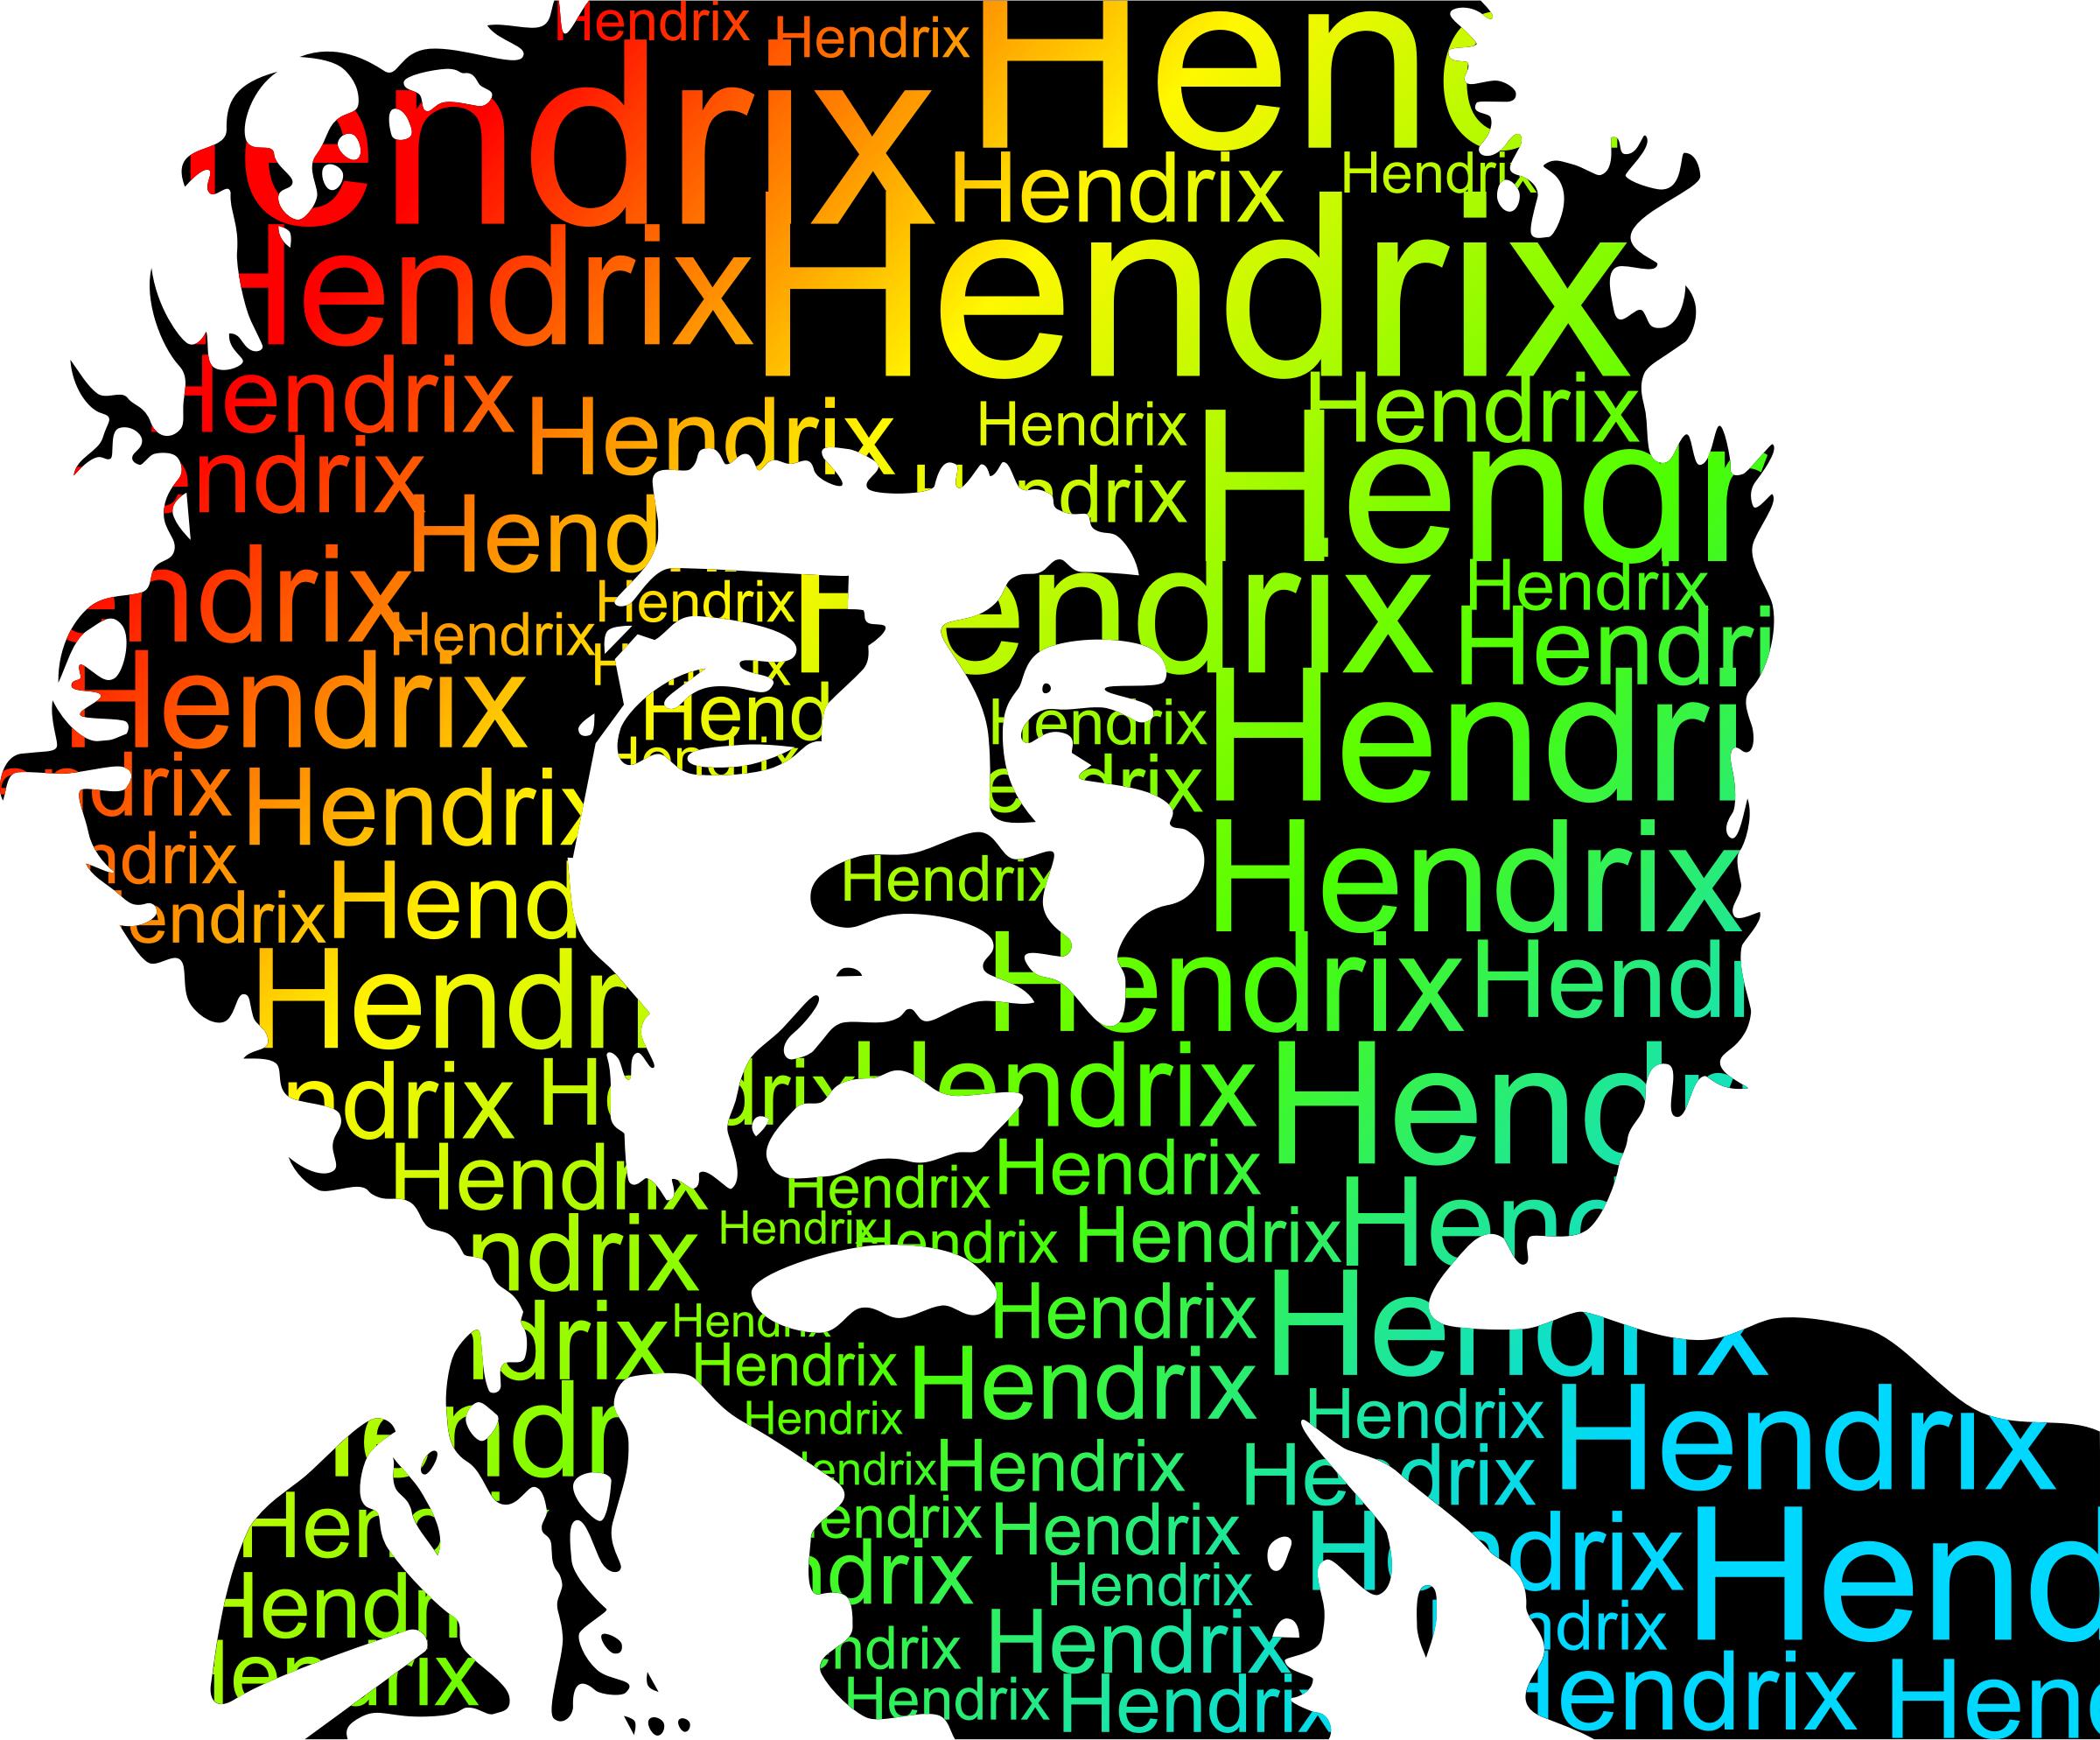 Typed Color Hendrix Portrait PNG icons